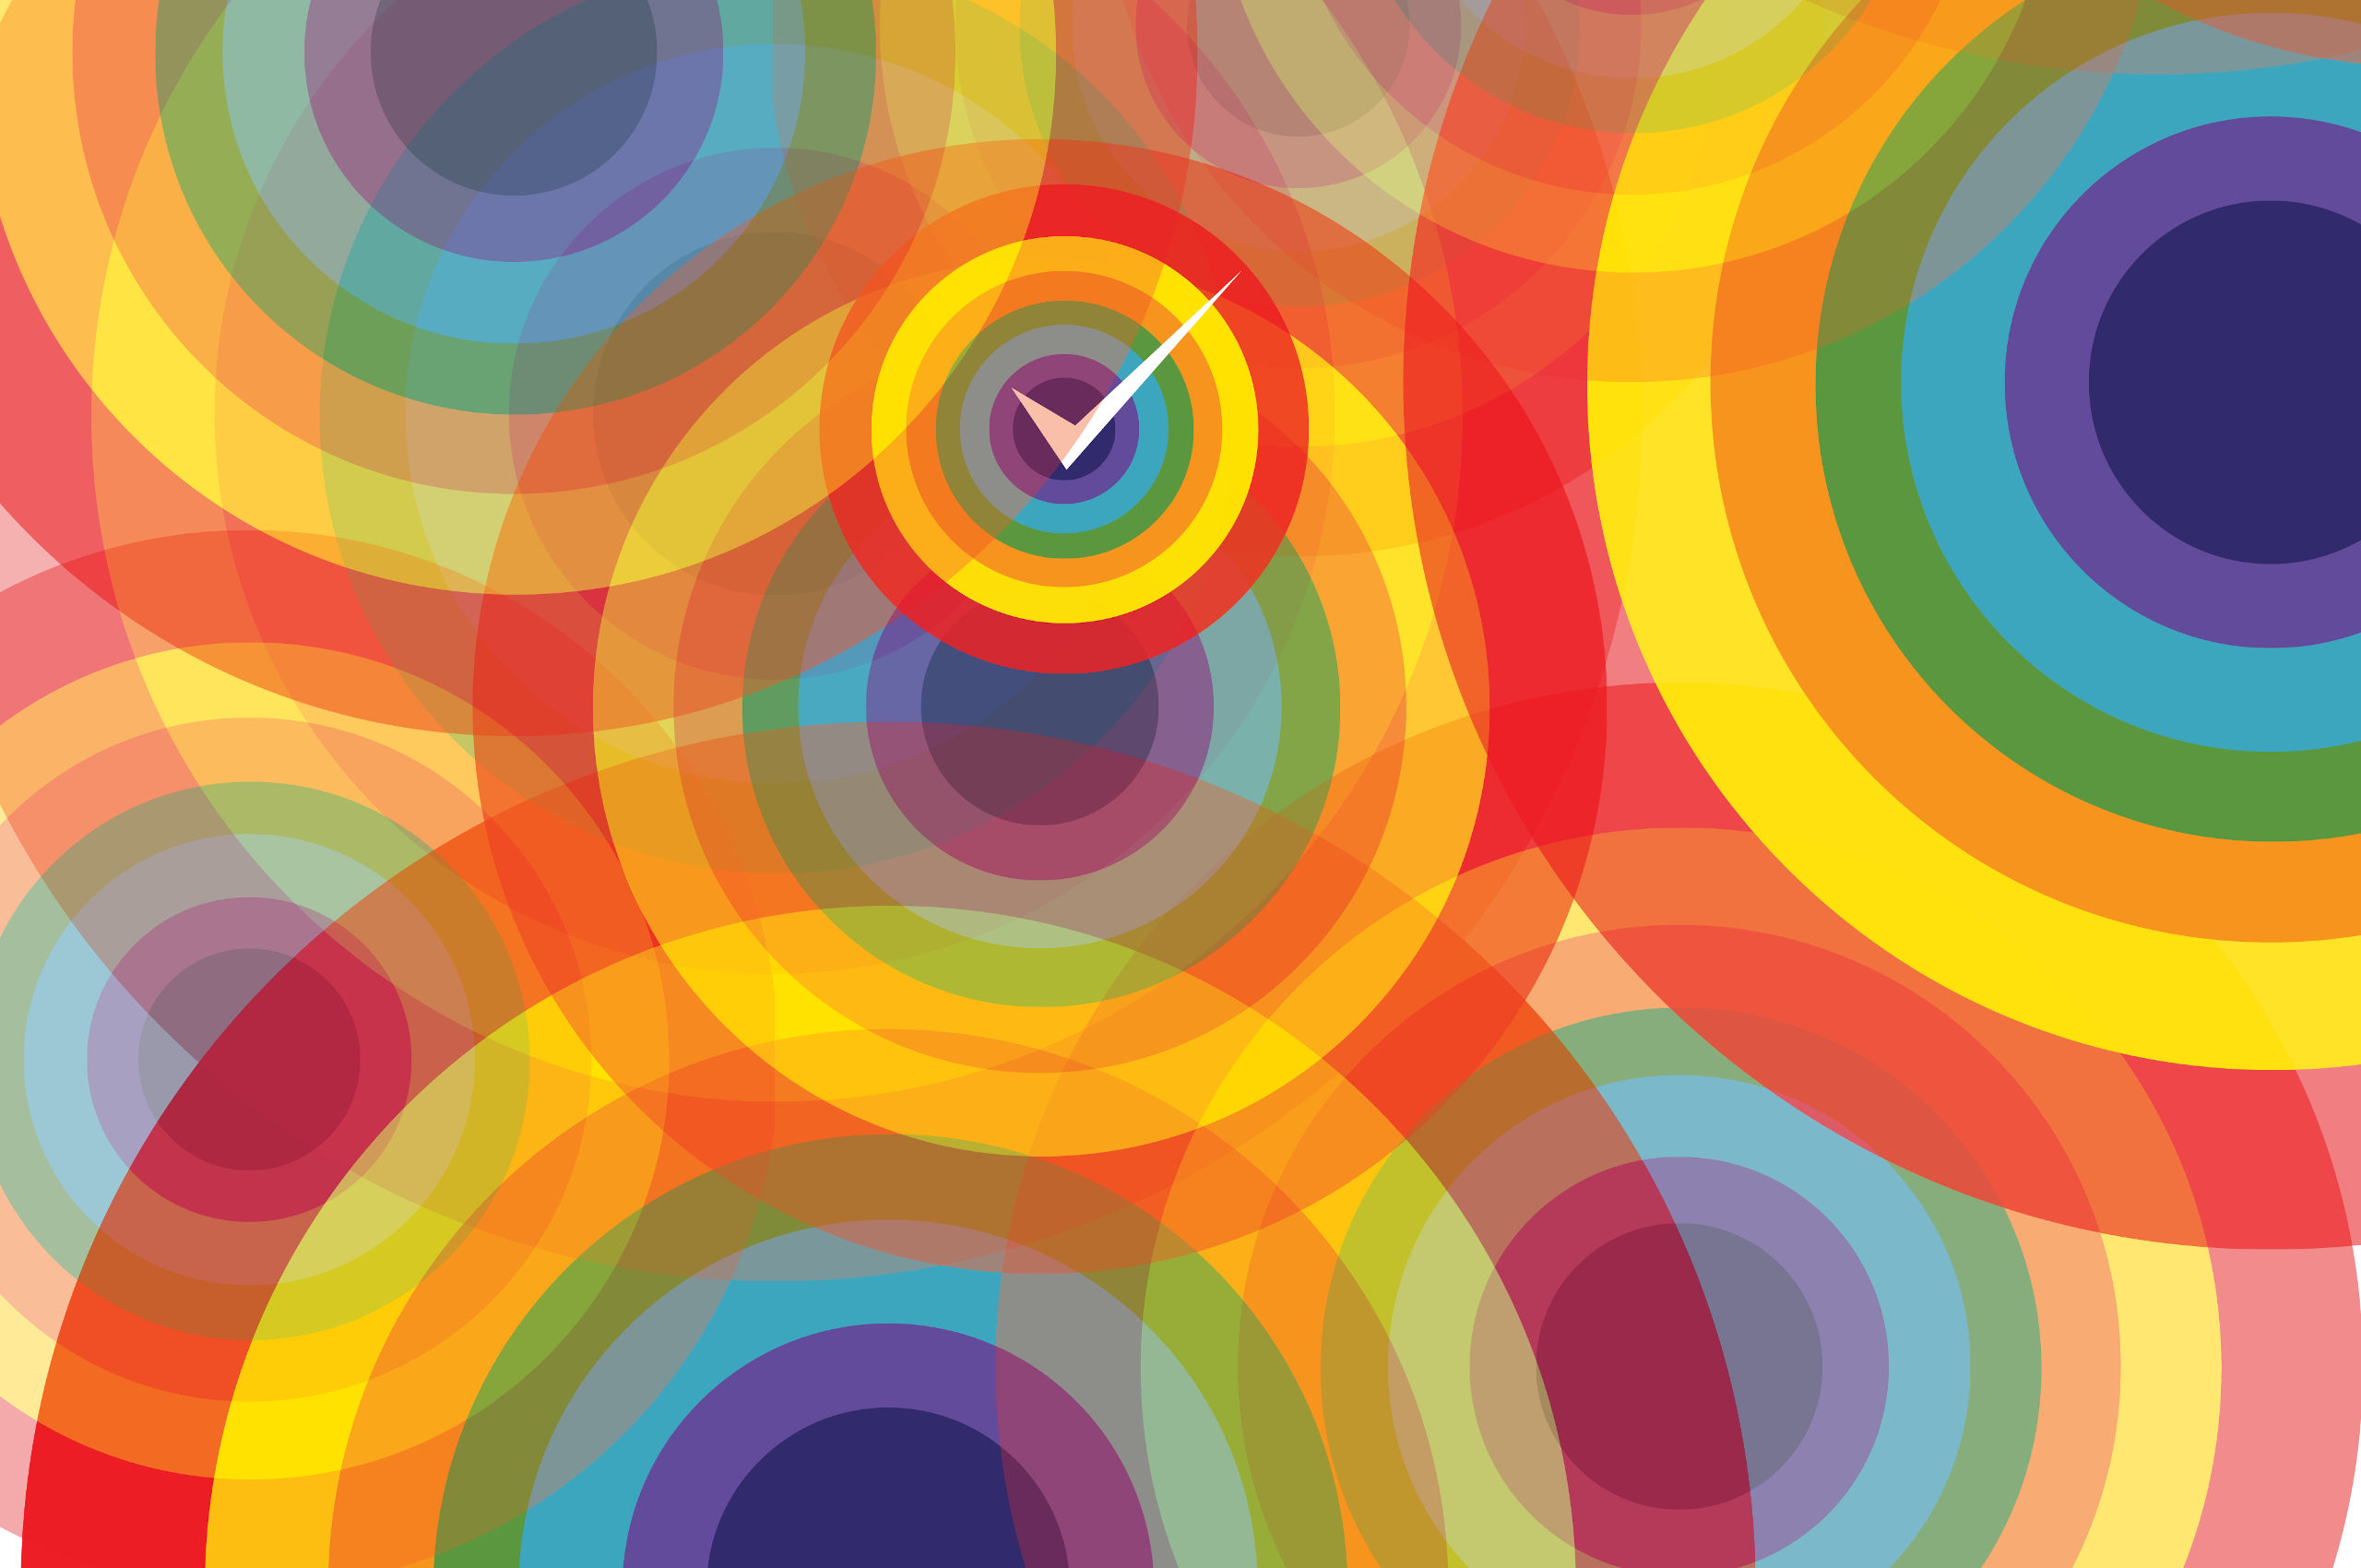 Overlapping rainbow target designs, one with a white tick